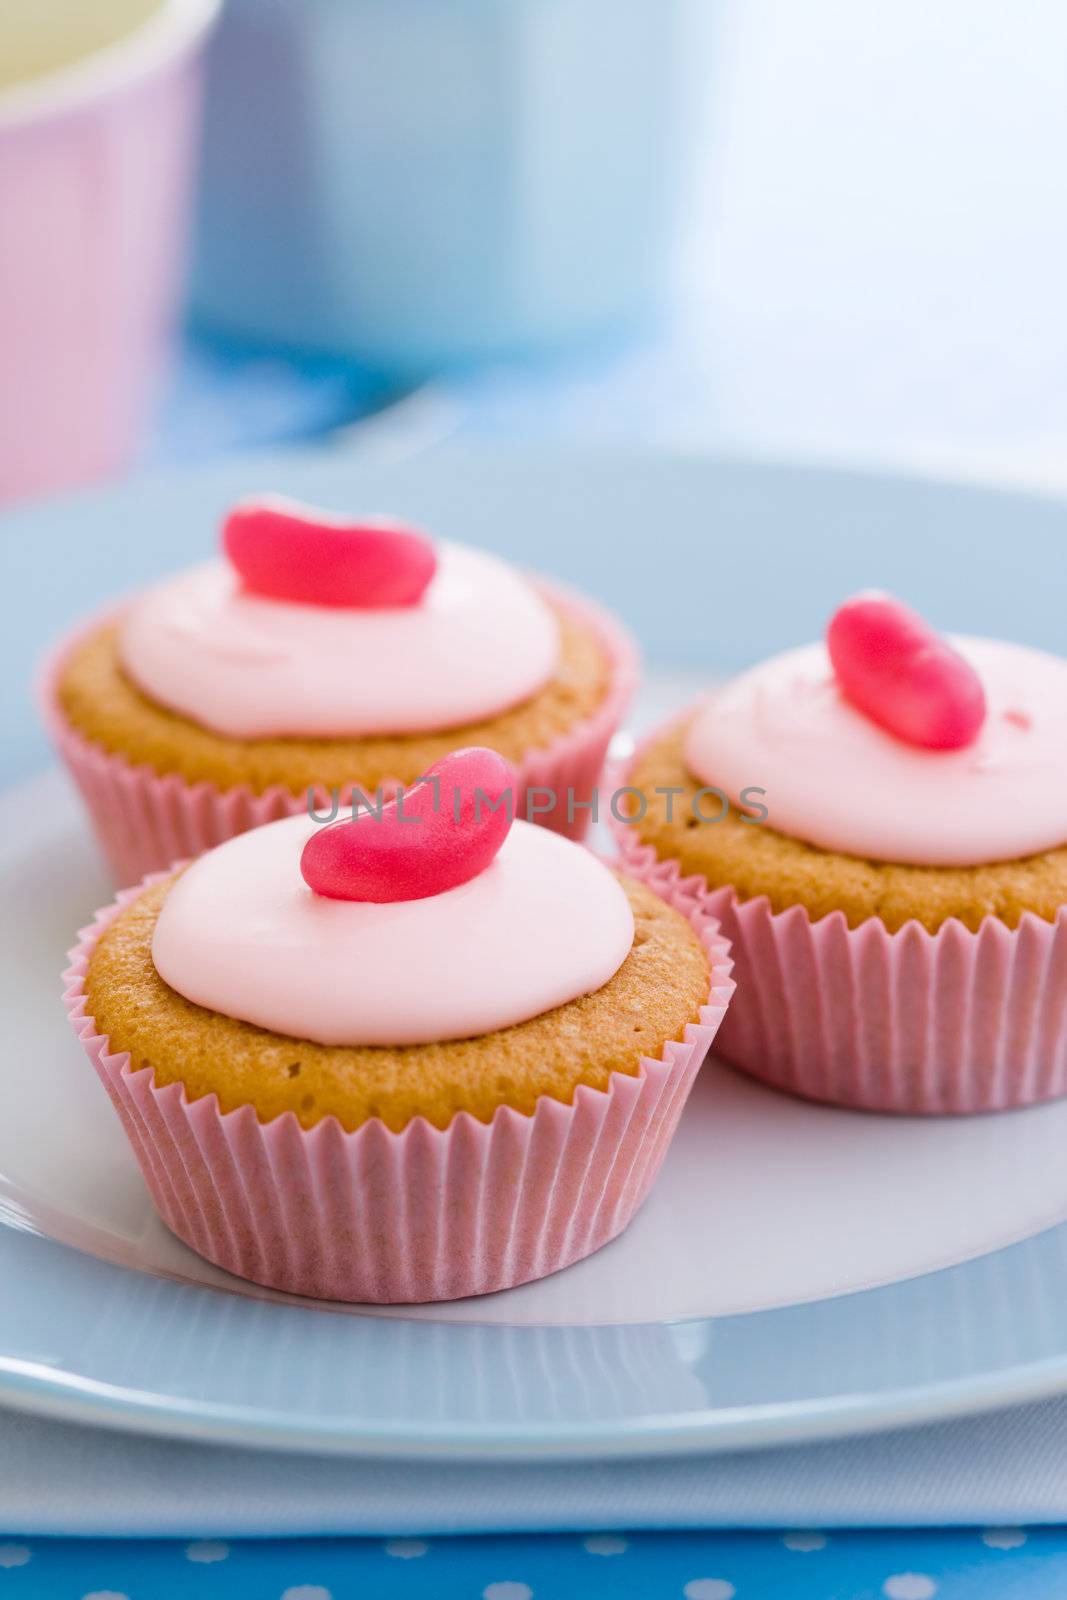 Three pink cupcakes decorated with jelly beans